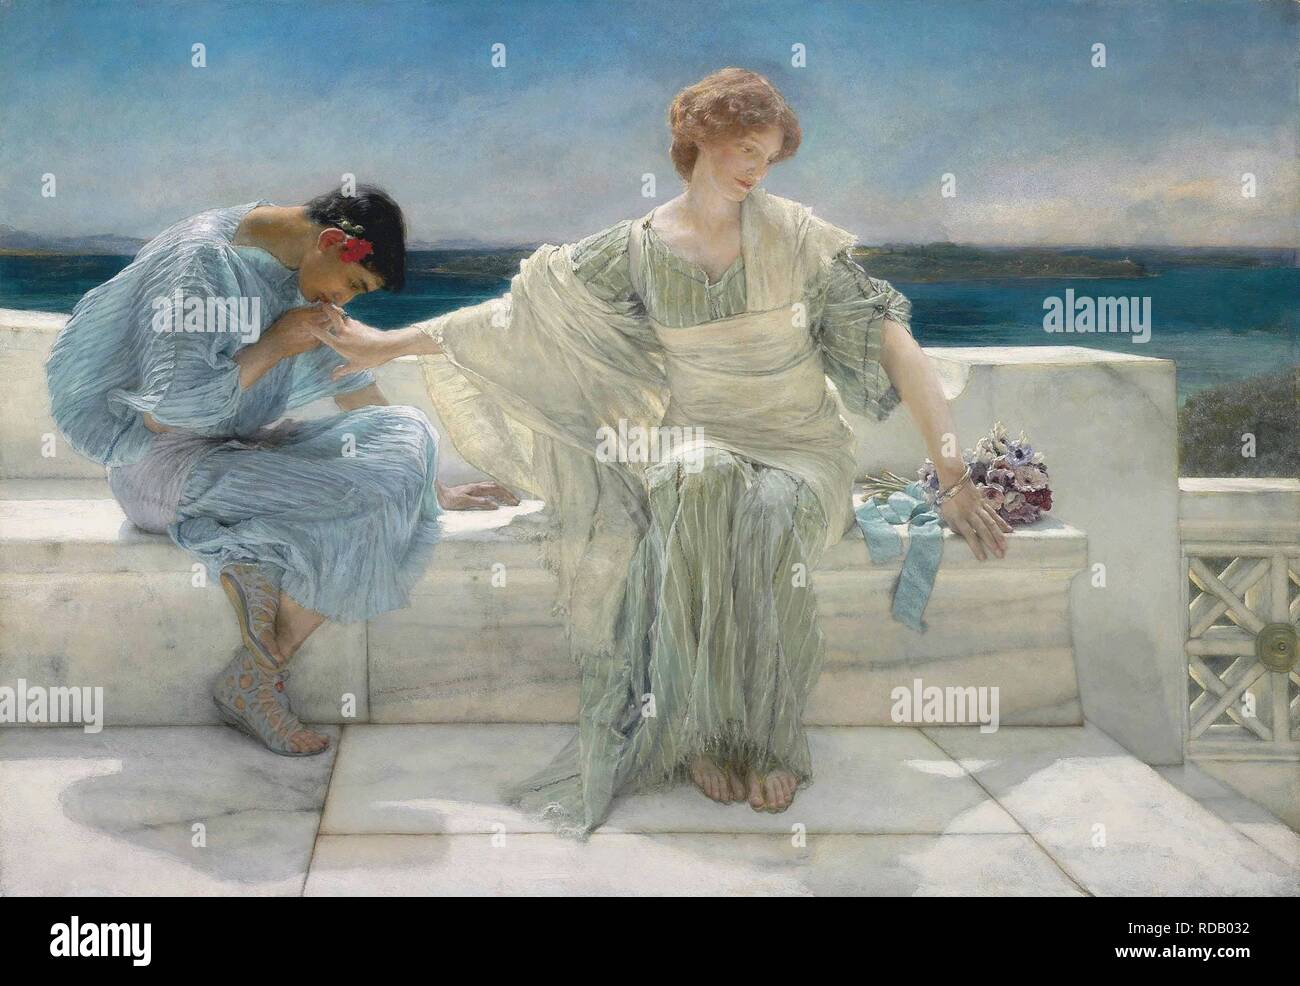 Ask Me No More. Museum: PRIVATE COLLECTION. Author: ALMA-TADEMA, SIR LAWRENCE. Stock Photo